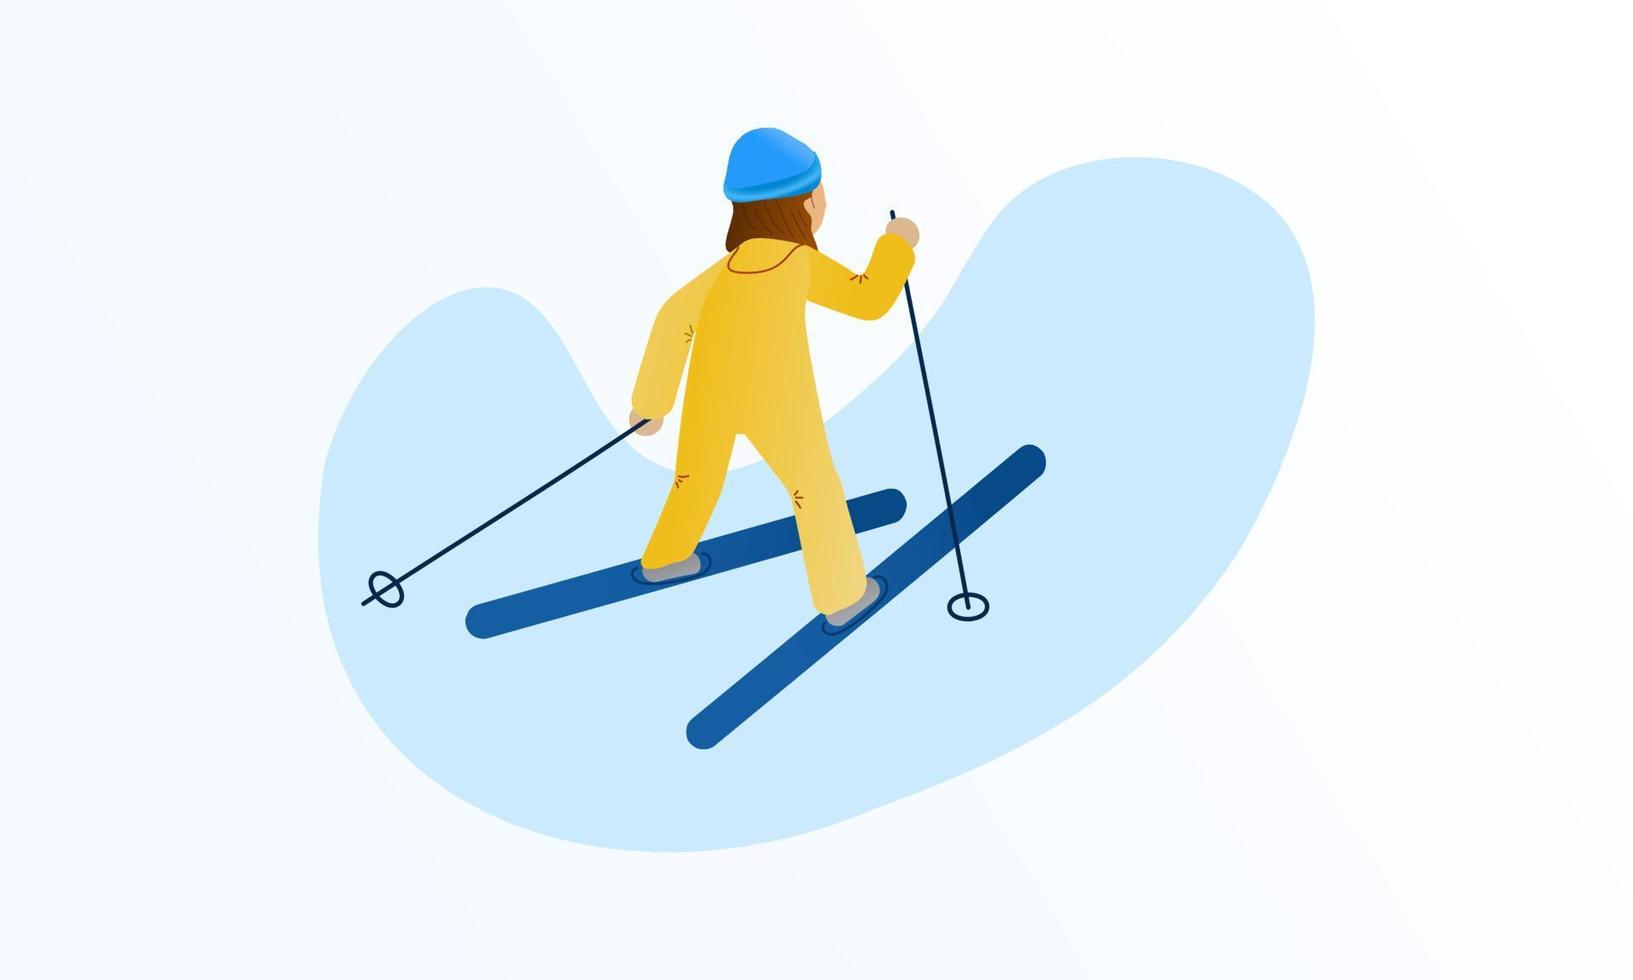 Child skiing in winter vector illustration. Isolated image kid. Yellow winter jumpsuit, blue skis